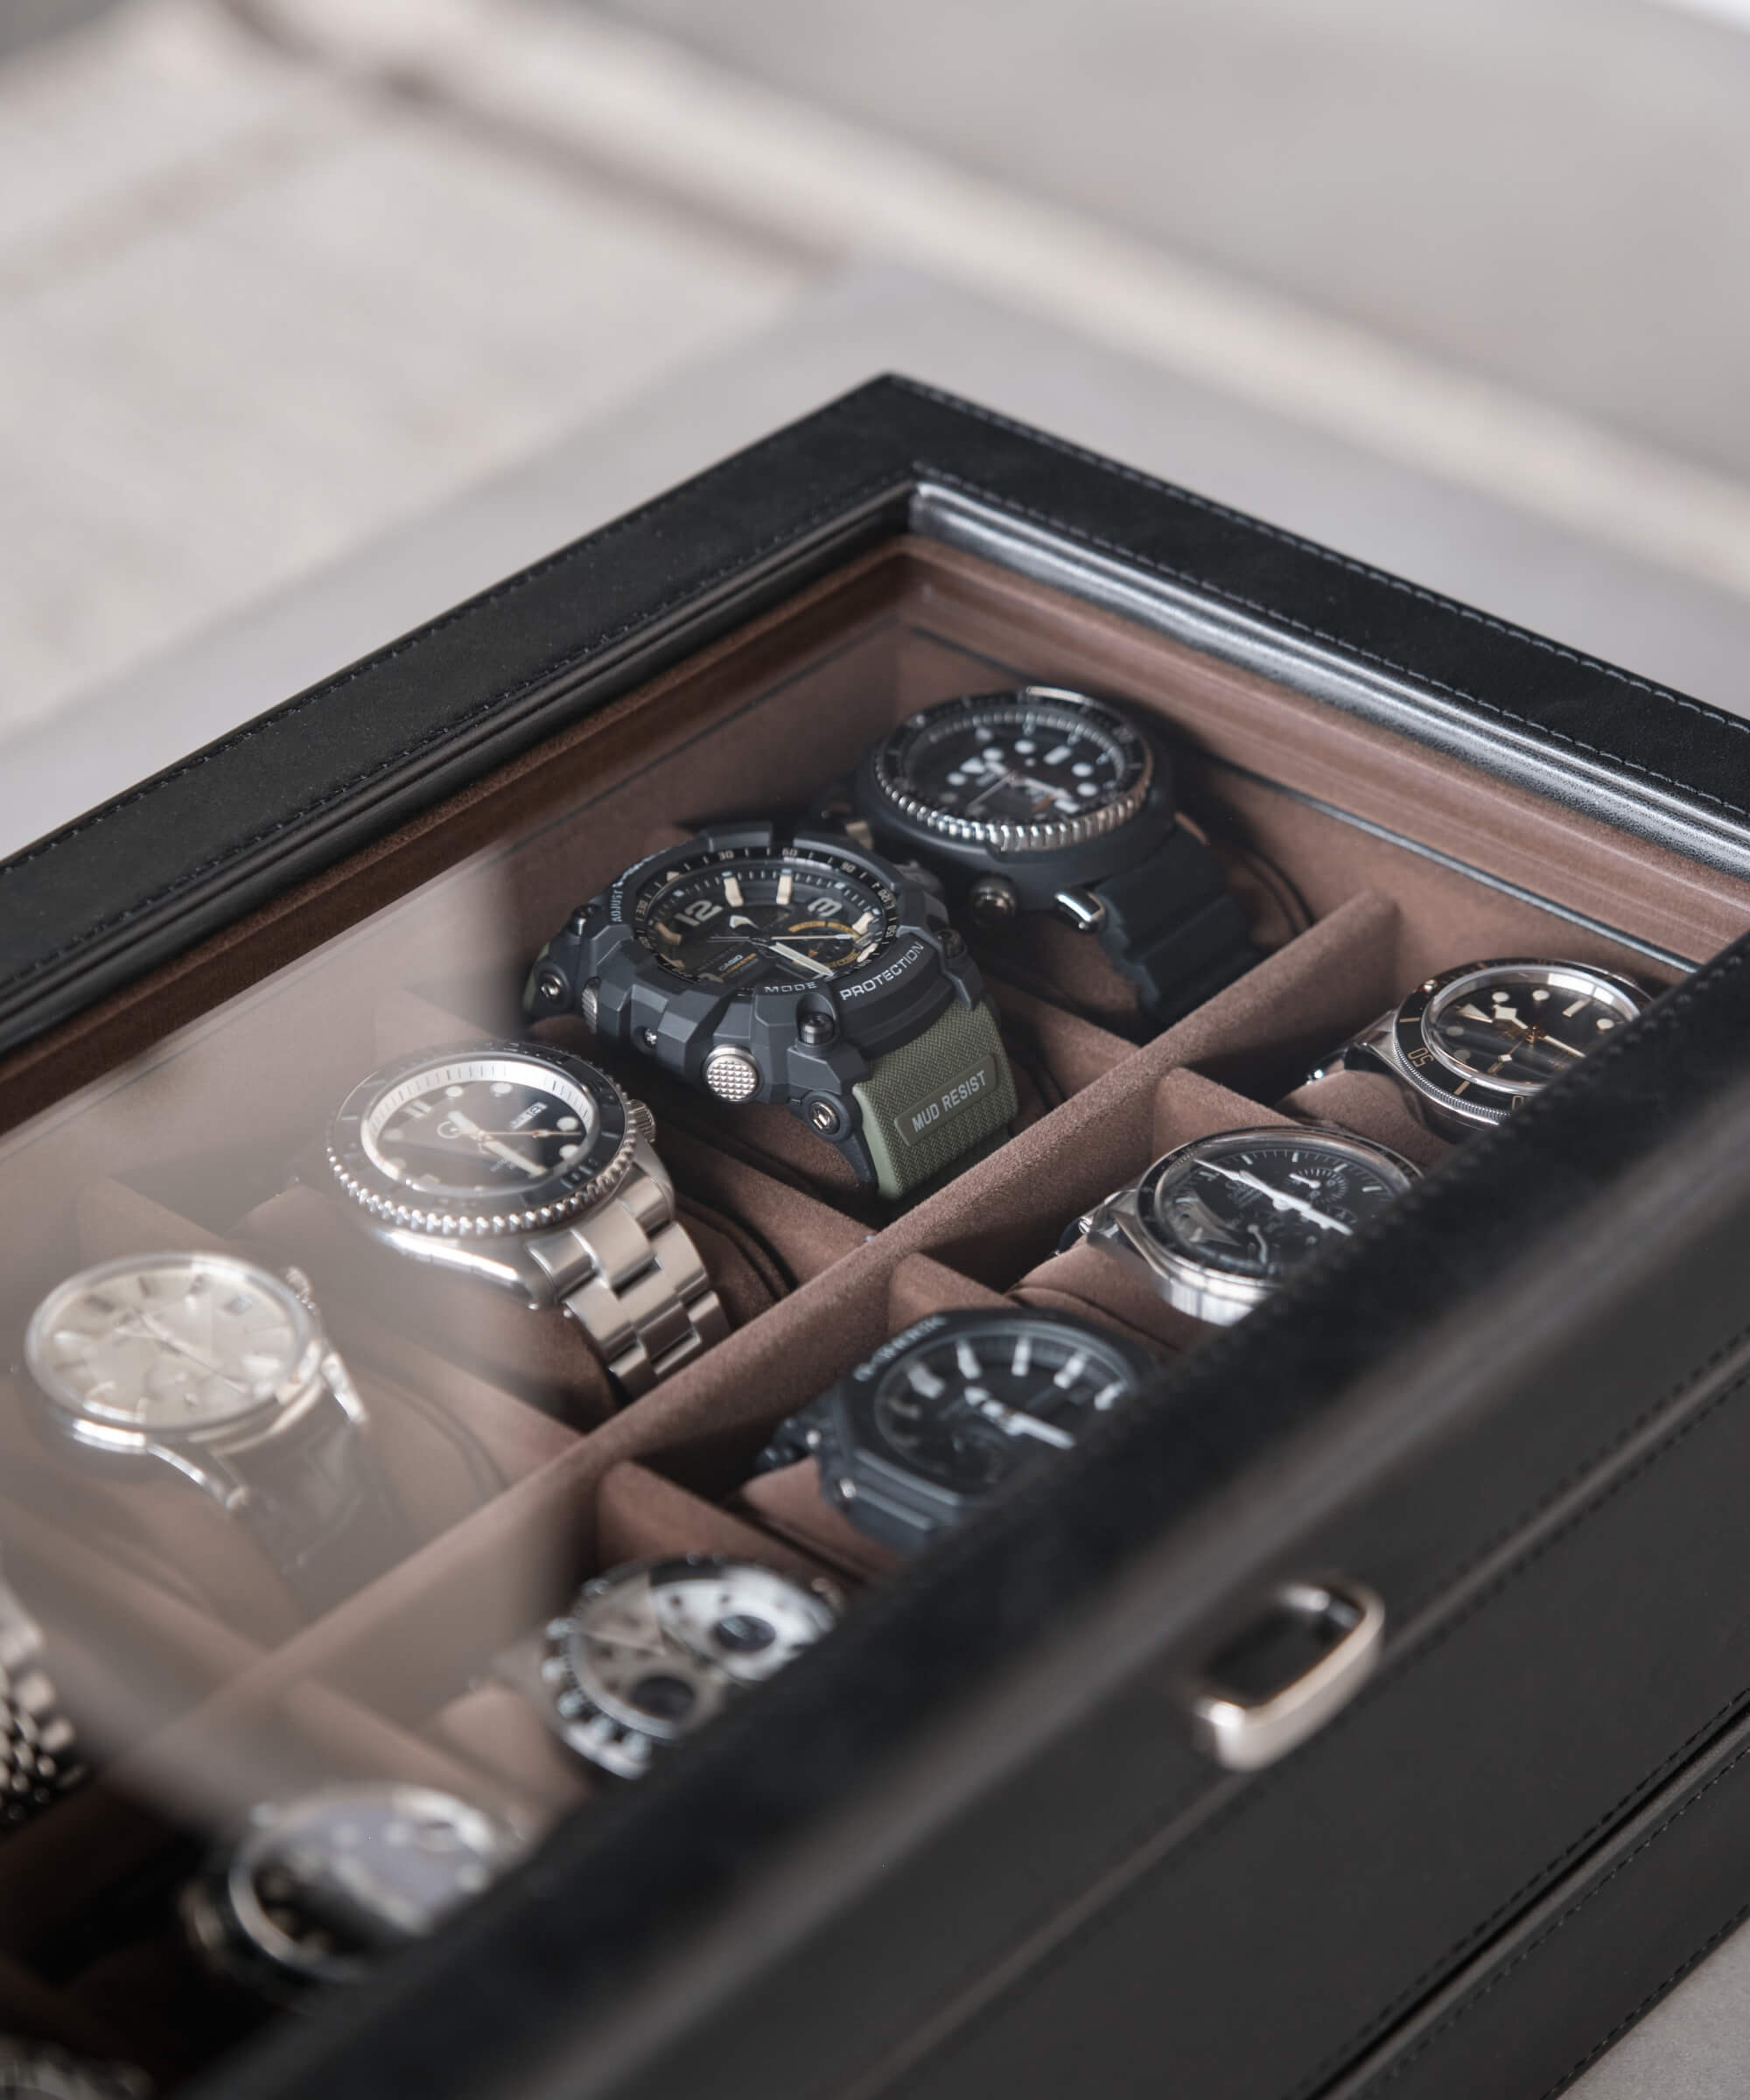 A TAWBURY Bayswater 12 Slot Watch Box with Drawer - Black with several timepieces in storage.